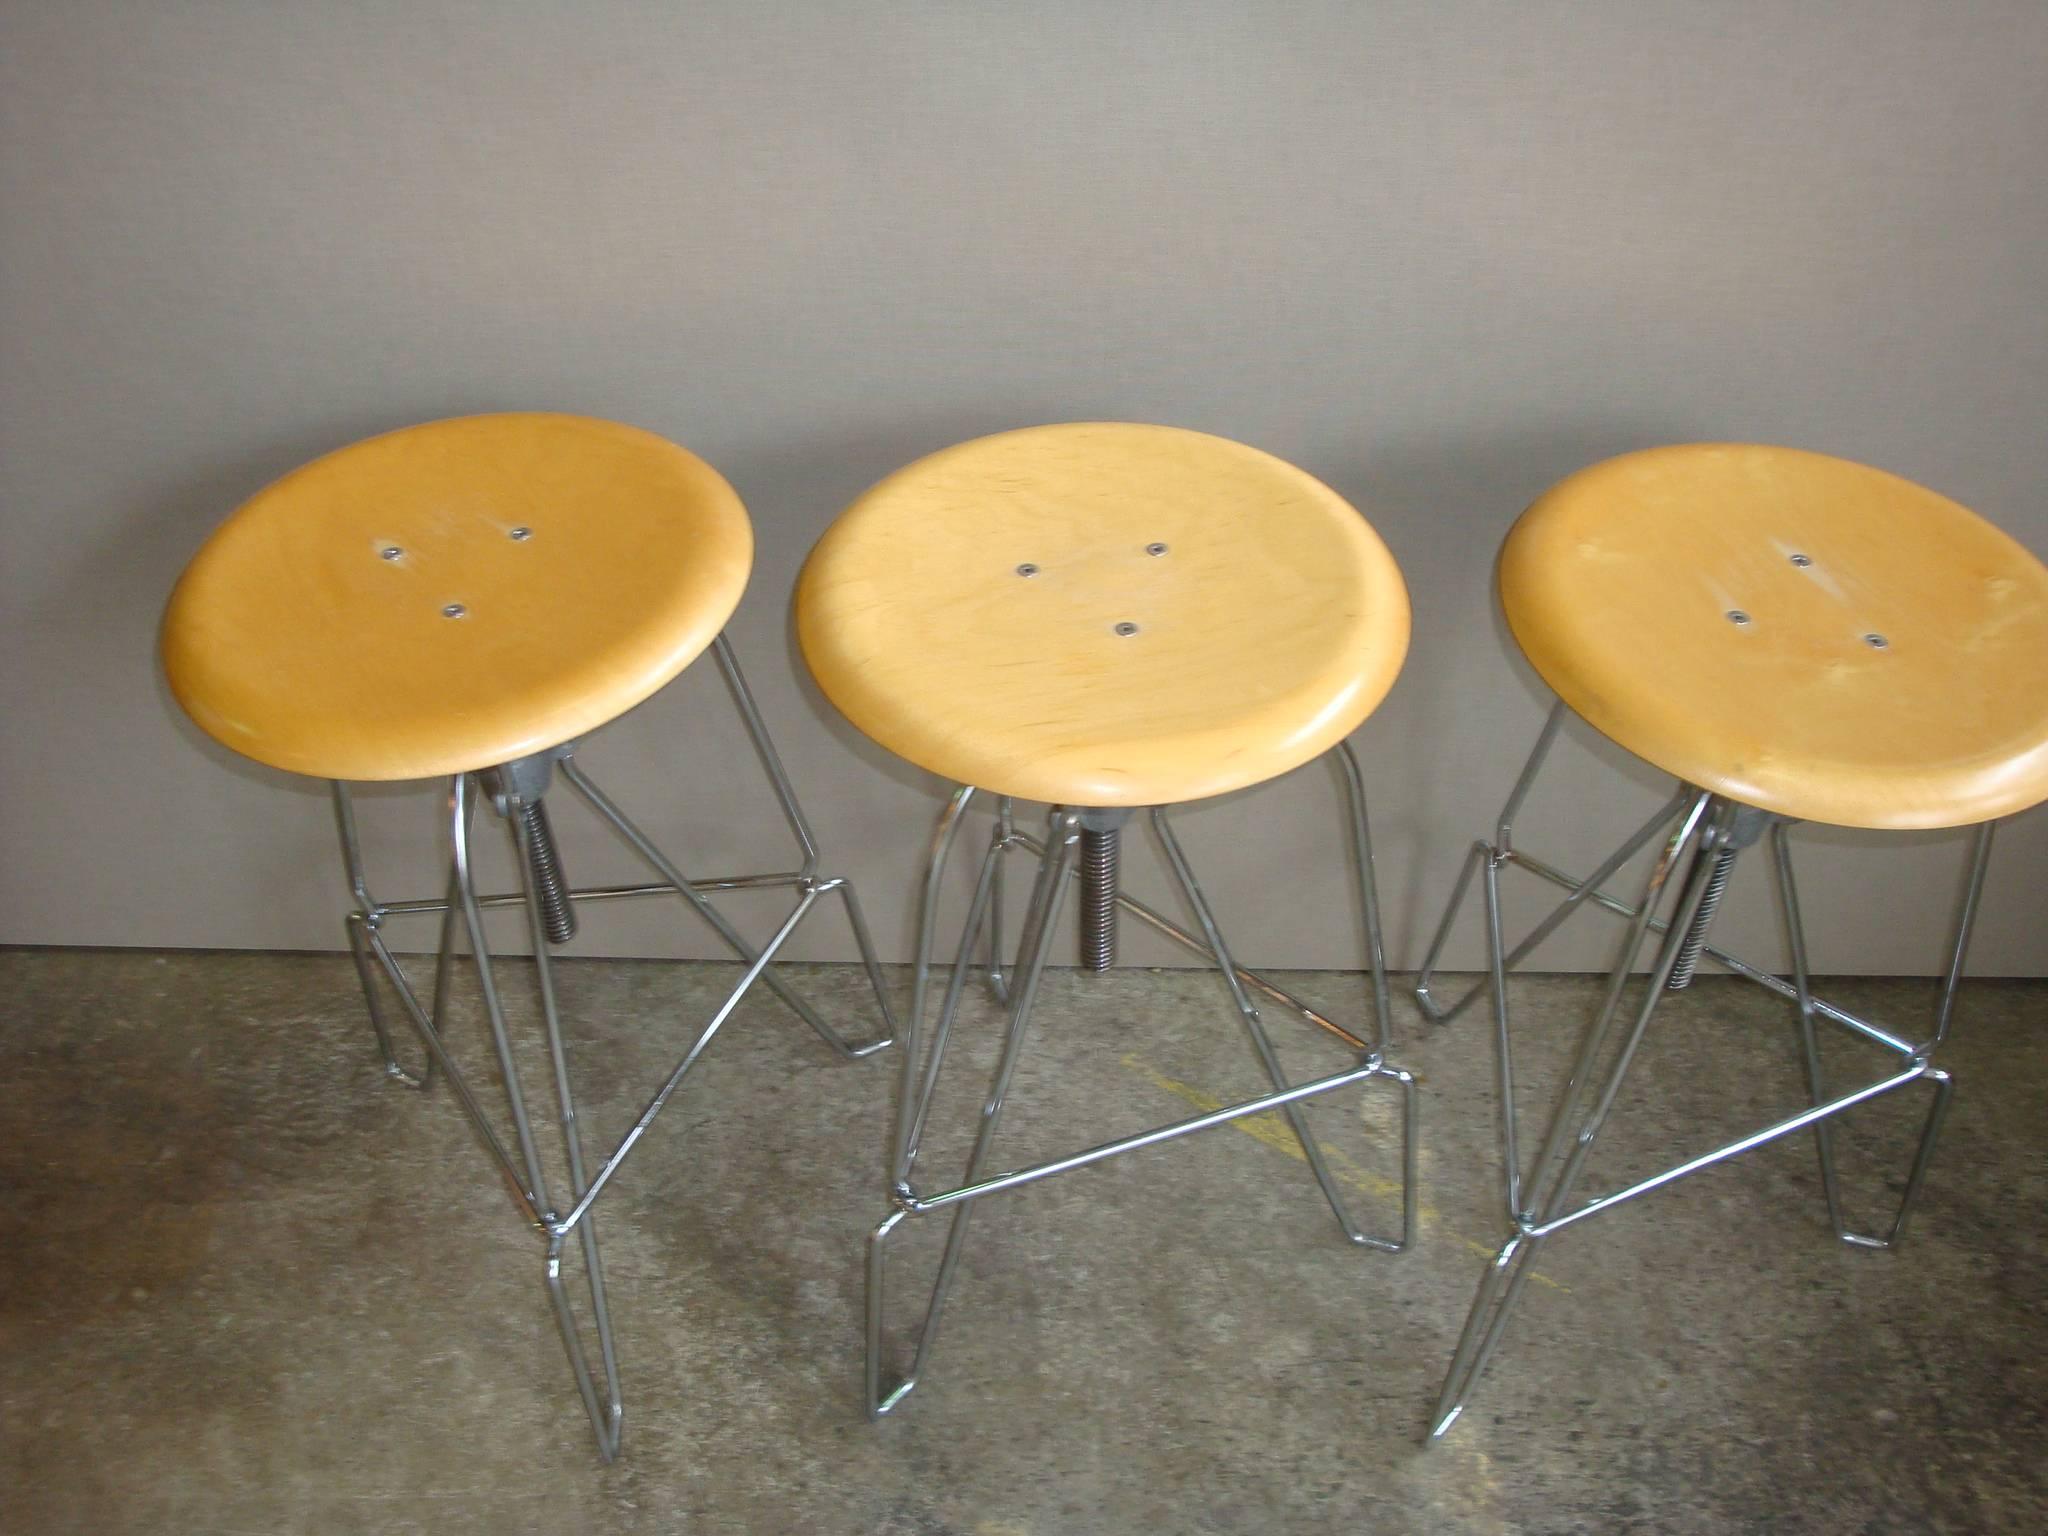 This is a set of three Jeff Covey for Herman Miller model 6 stools. The legs are chrome with a maple seat. The height is adjustable 23-28.